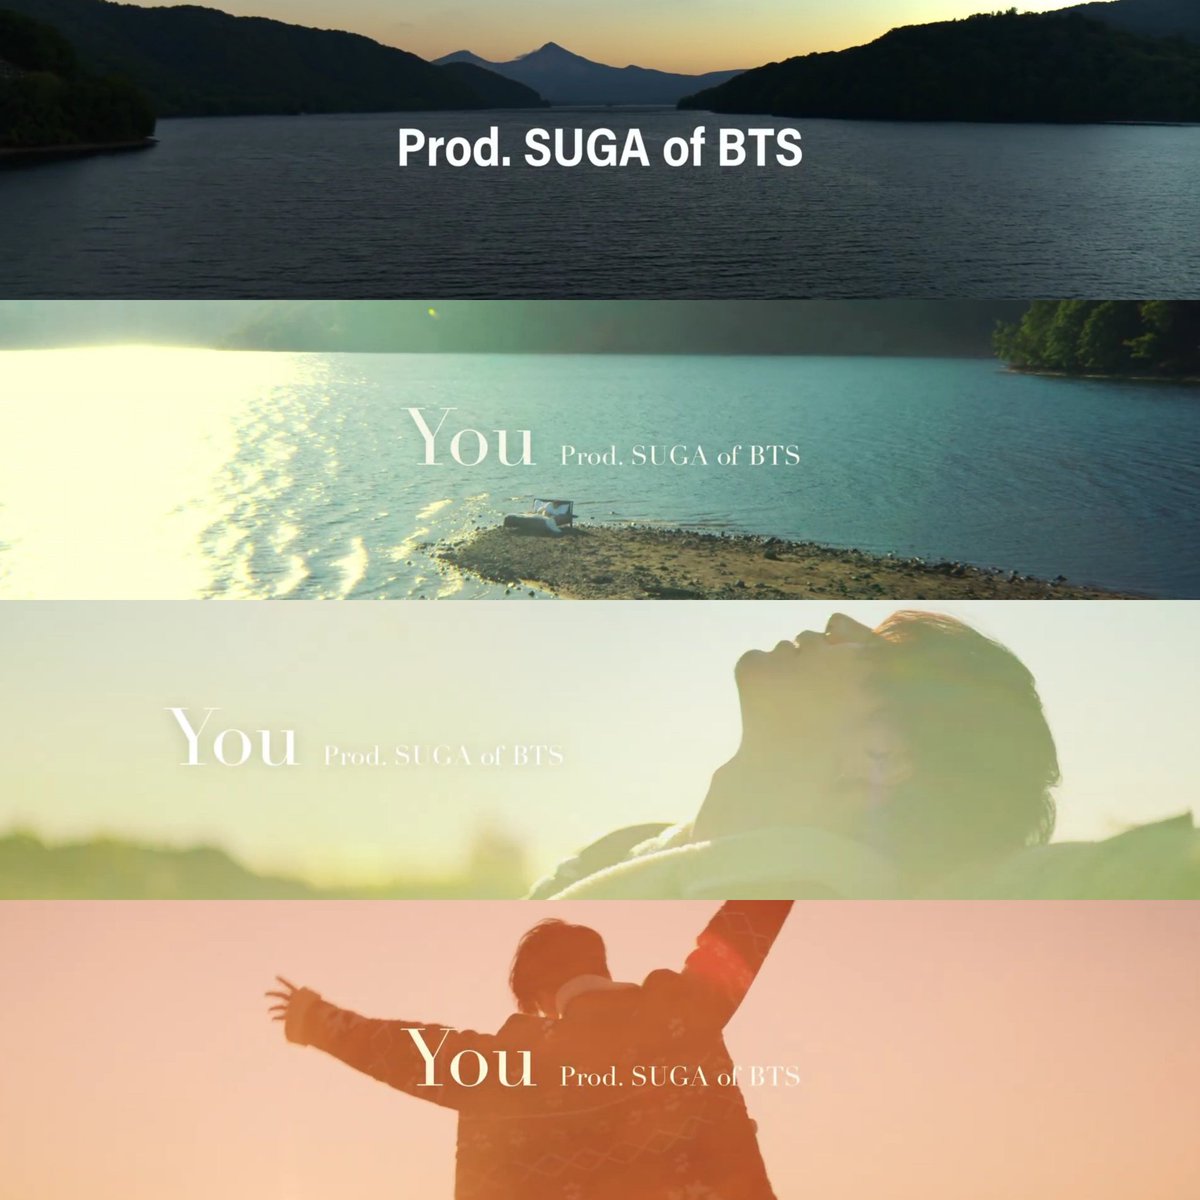 Prod suga of bts. Ømi you Prod. Suga of BTS ømi you Prod. Suga of BTS -Official Music Video. My personality is Prod. By suga.